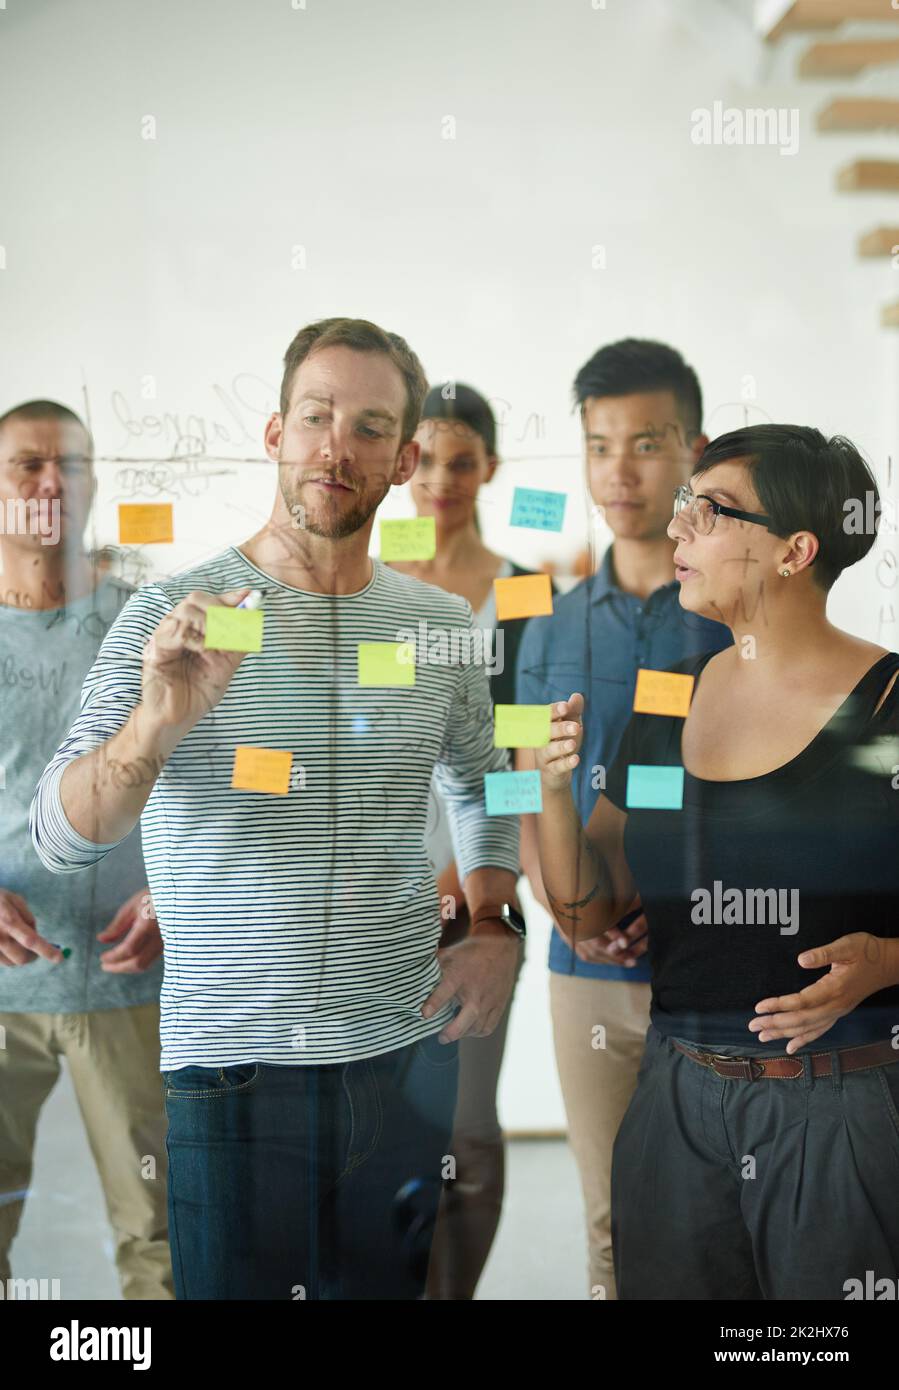 Brainstorm board post it editorial stock photo. Image of arranged - 45276143